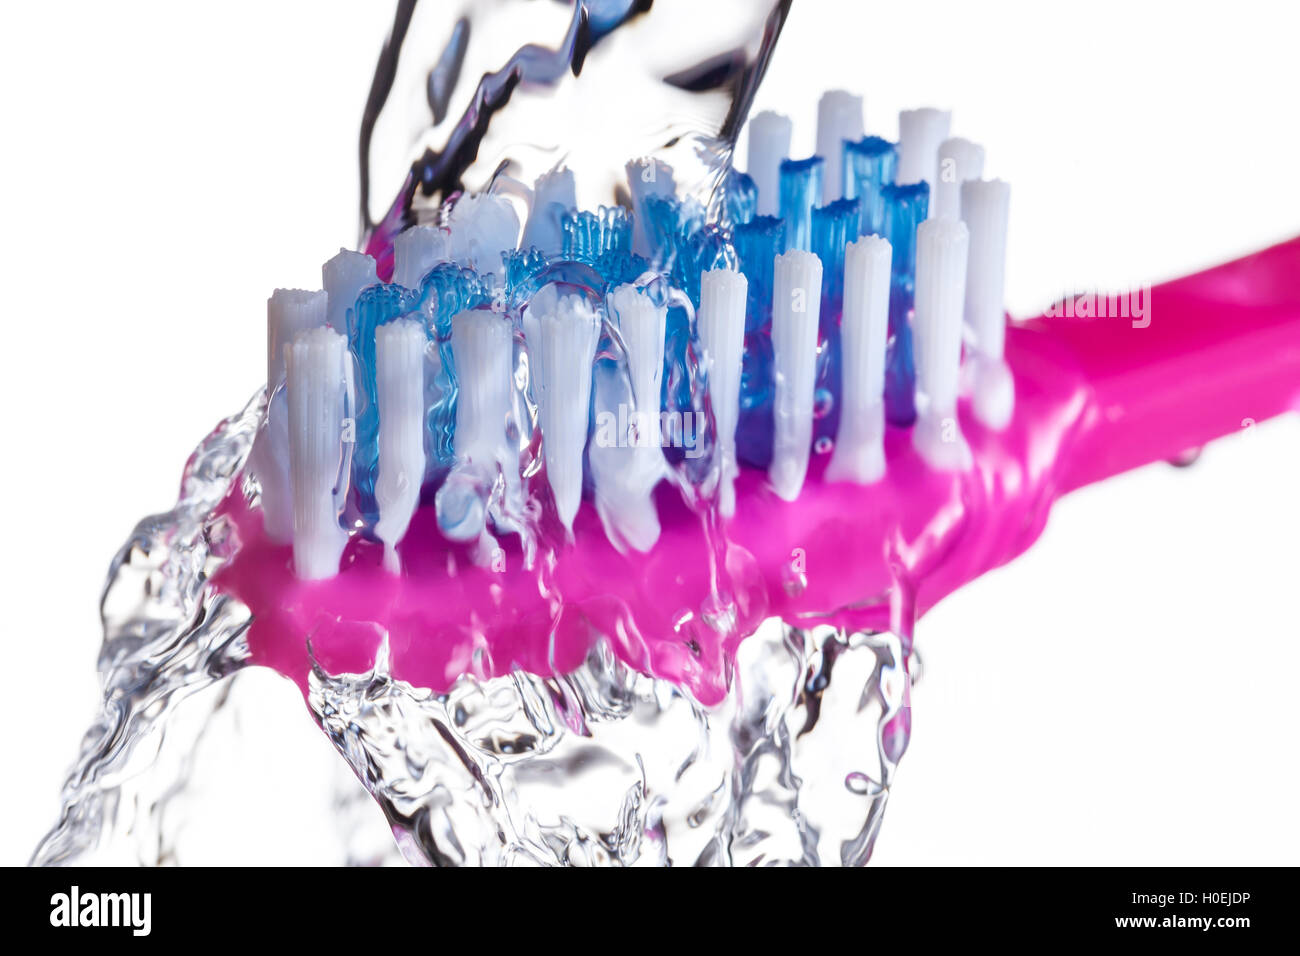 Toothbrush with water jet Stock Photo